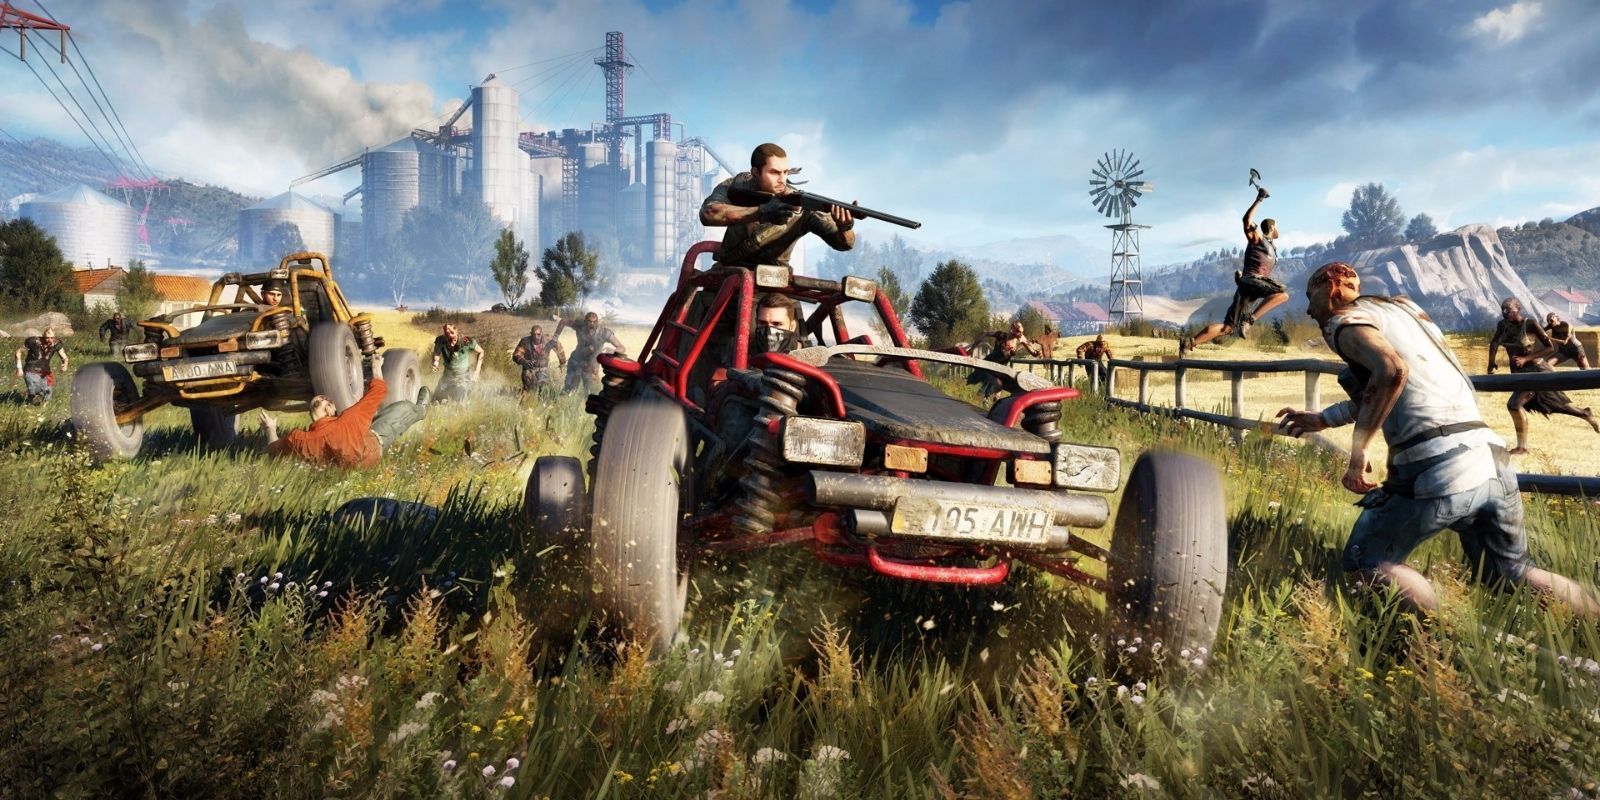 Dying Light players face down zombie hordes in the countryside. 